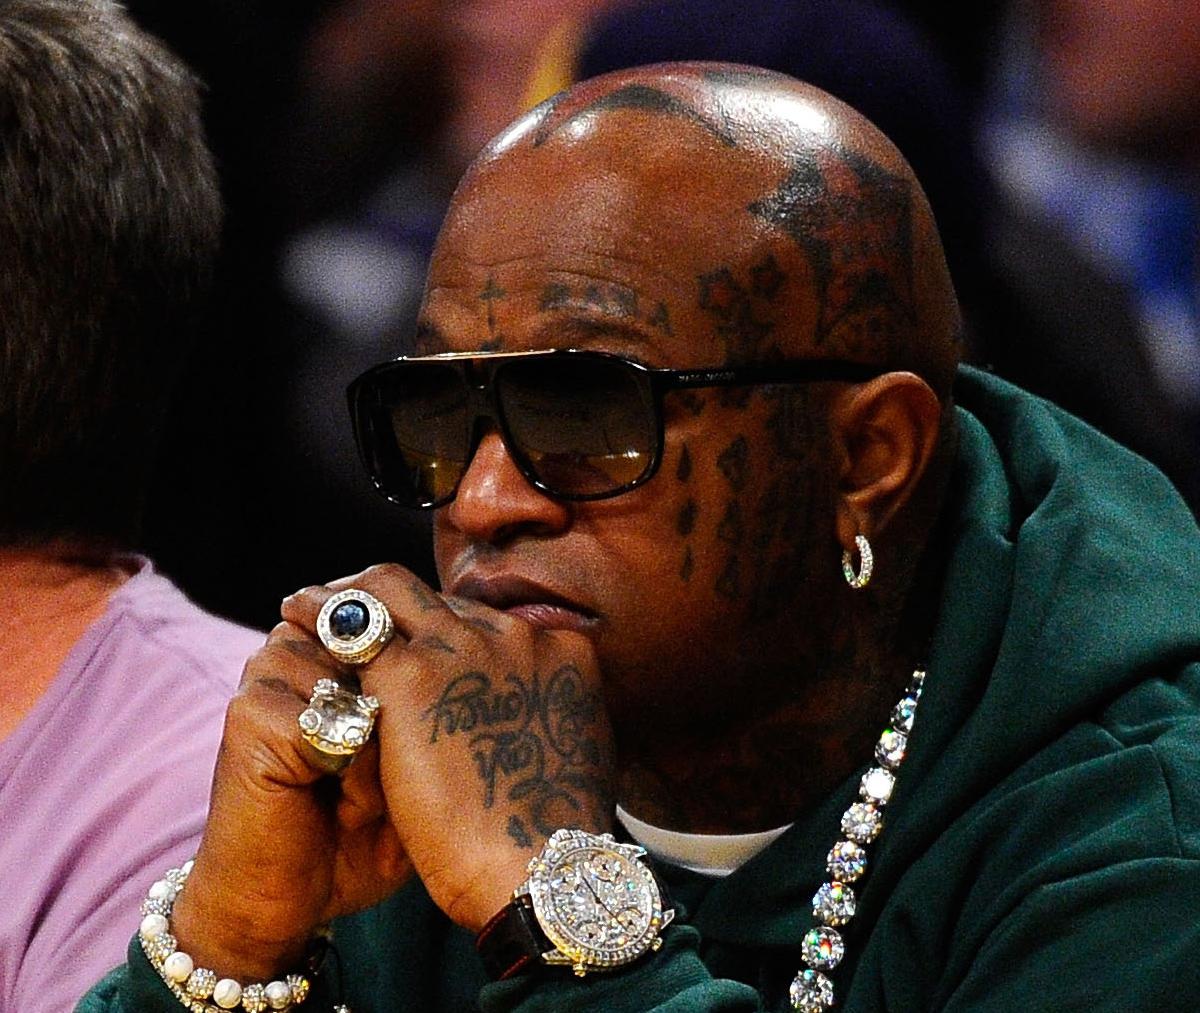 Birdman and 50 cent super bowl betting f1 race odds